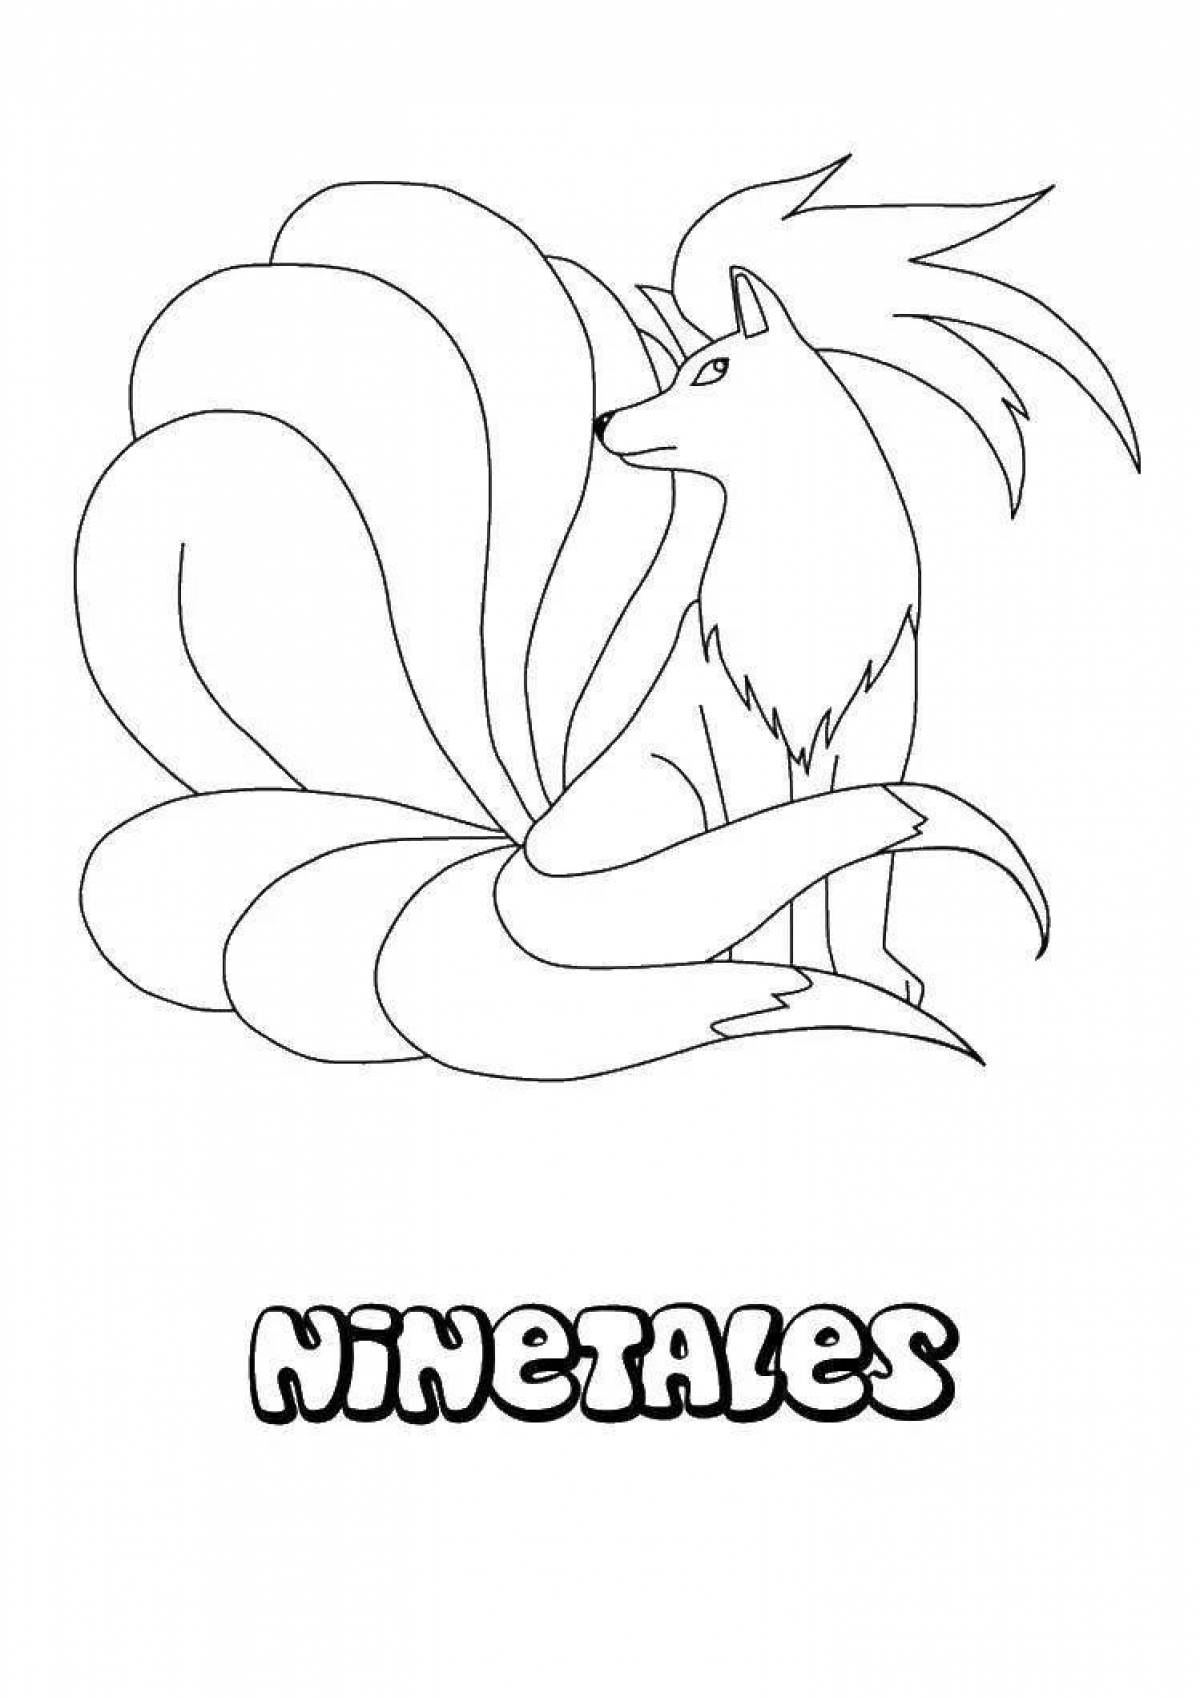 Cute 9-tailed fox coloring book